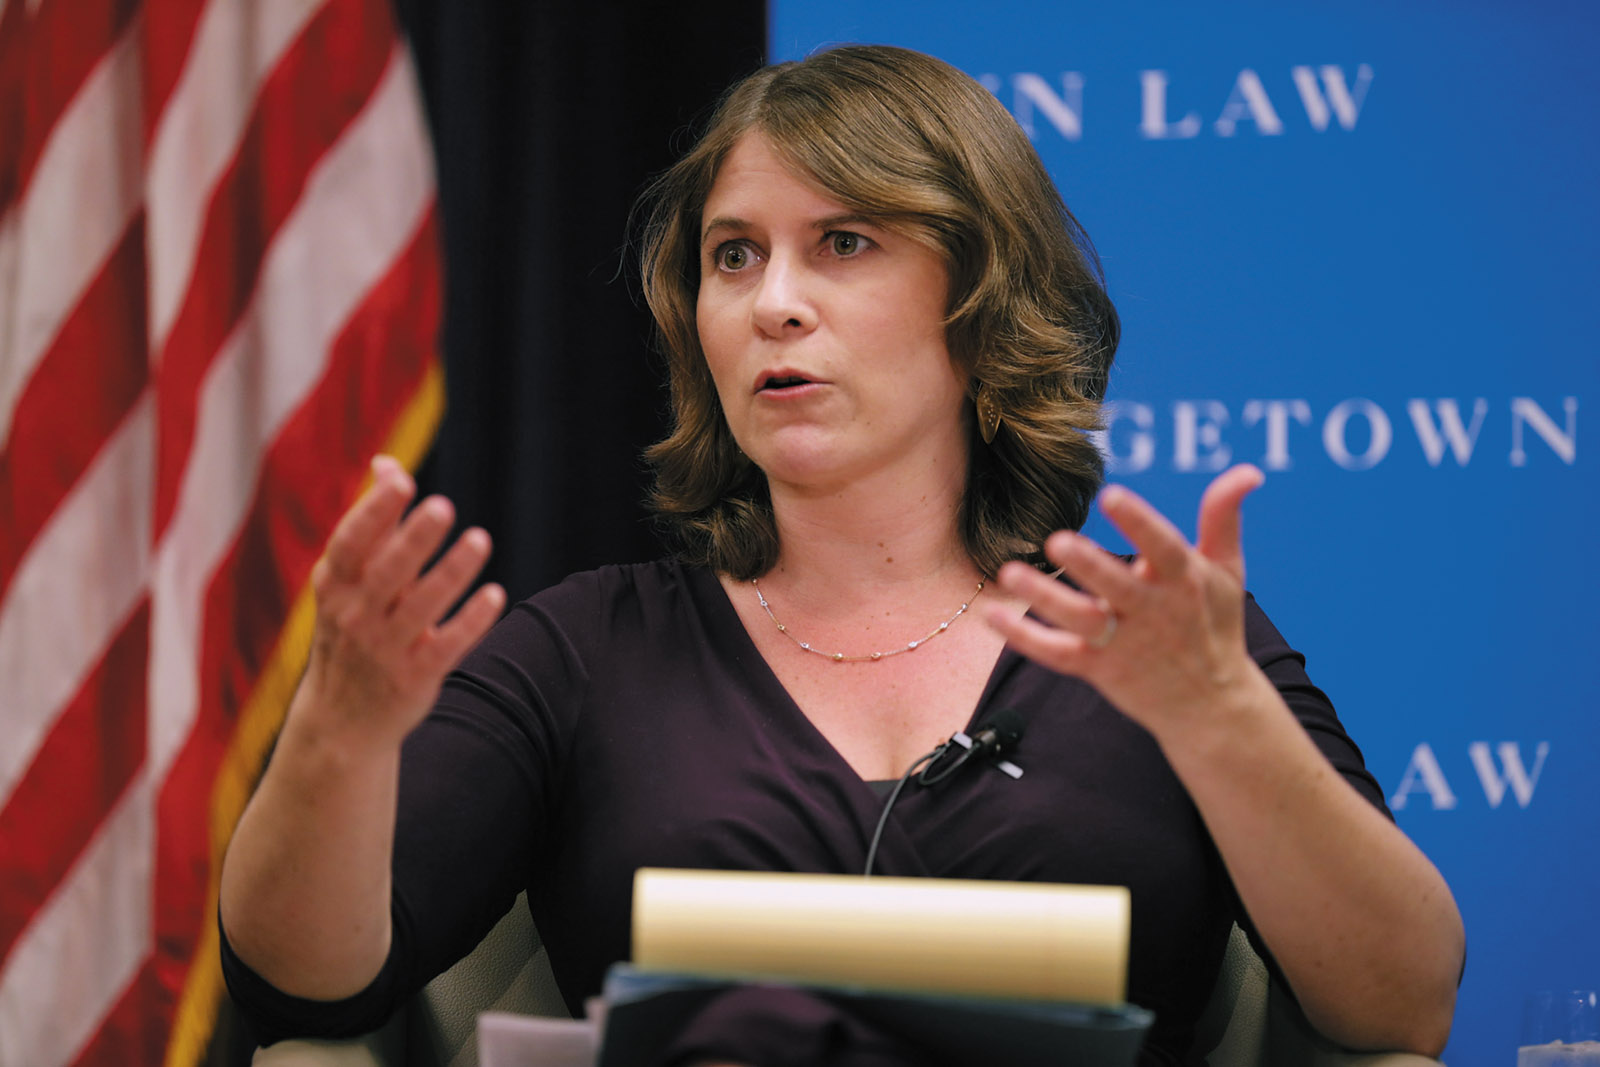 Rosa Brooks moderating a discussion on ‘the next generation’s human rights challenges’ during a program that was cosponsored by The New York Review, Georgetown University Law Center, Washington, D.C., April 2014